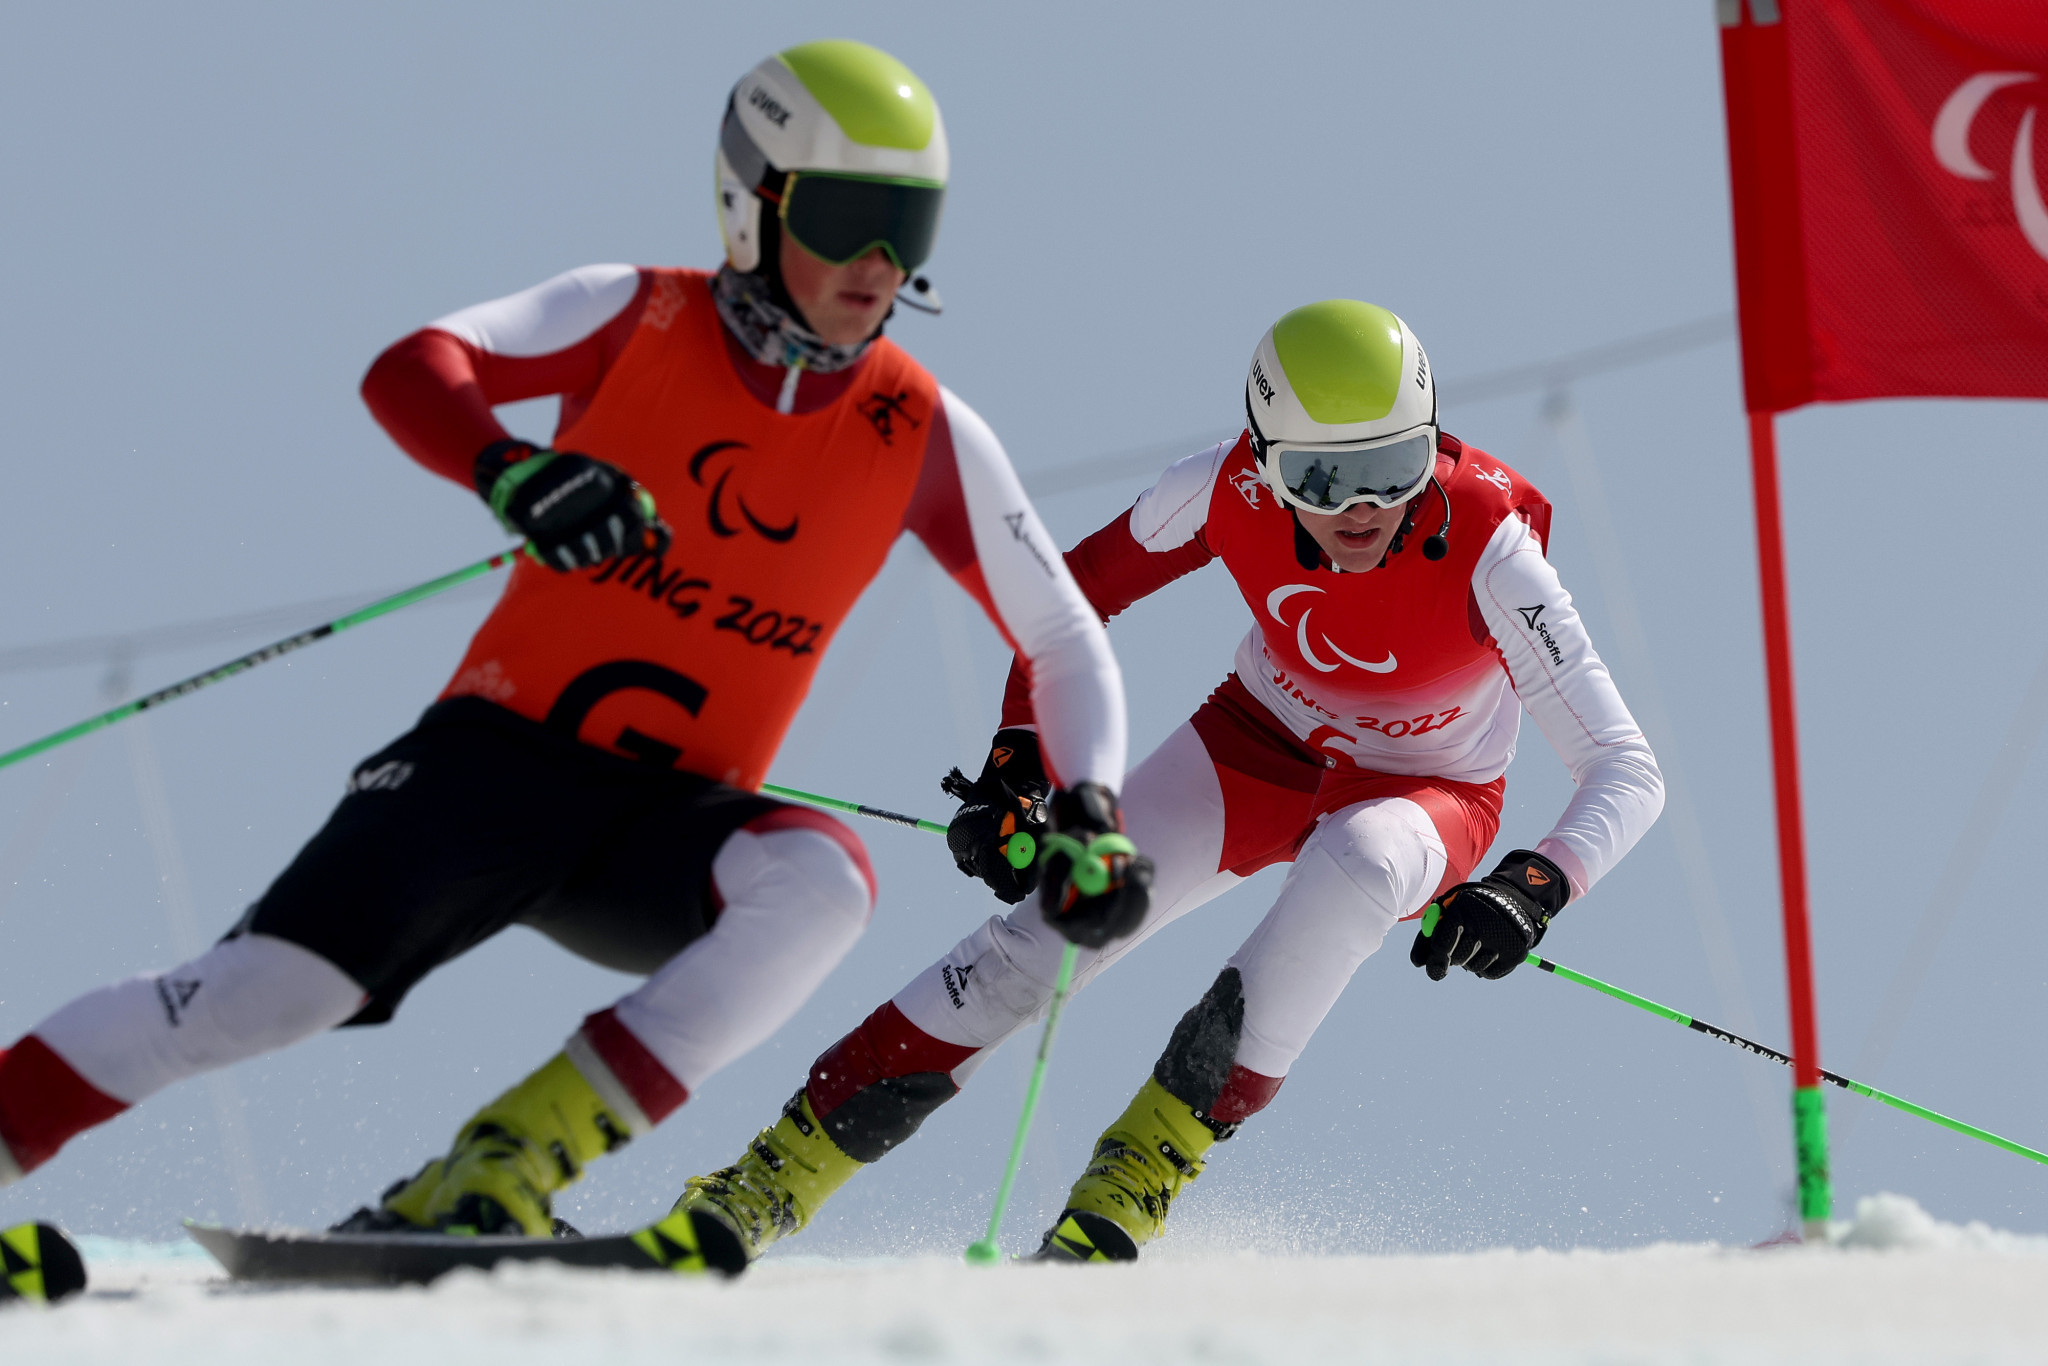 Teenager Aigner wins second gold of Beijing 2022 Paralympics in giant slalom